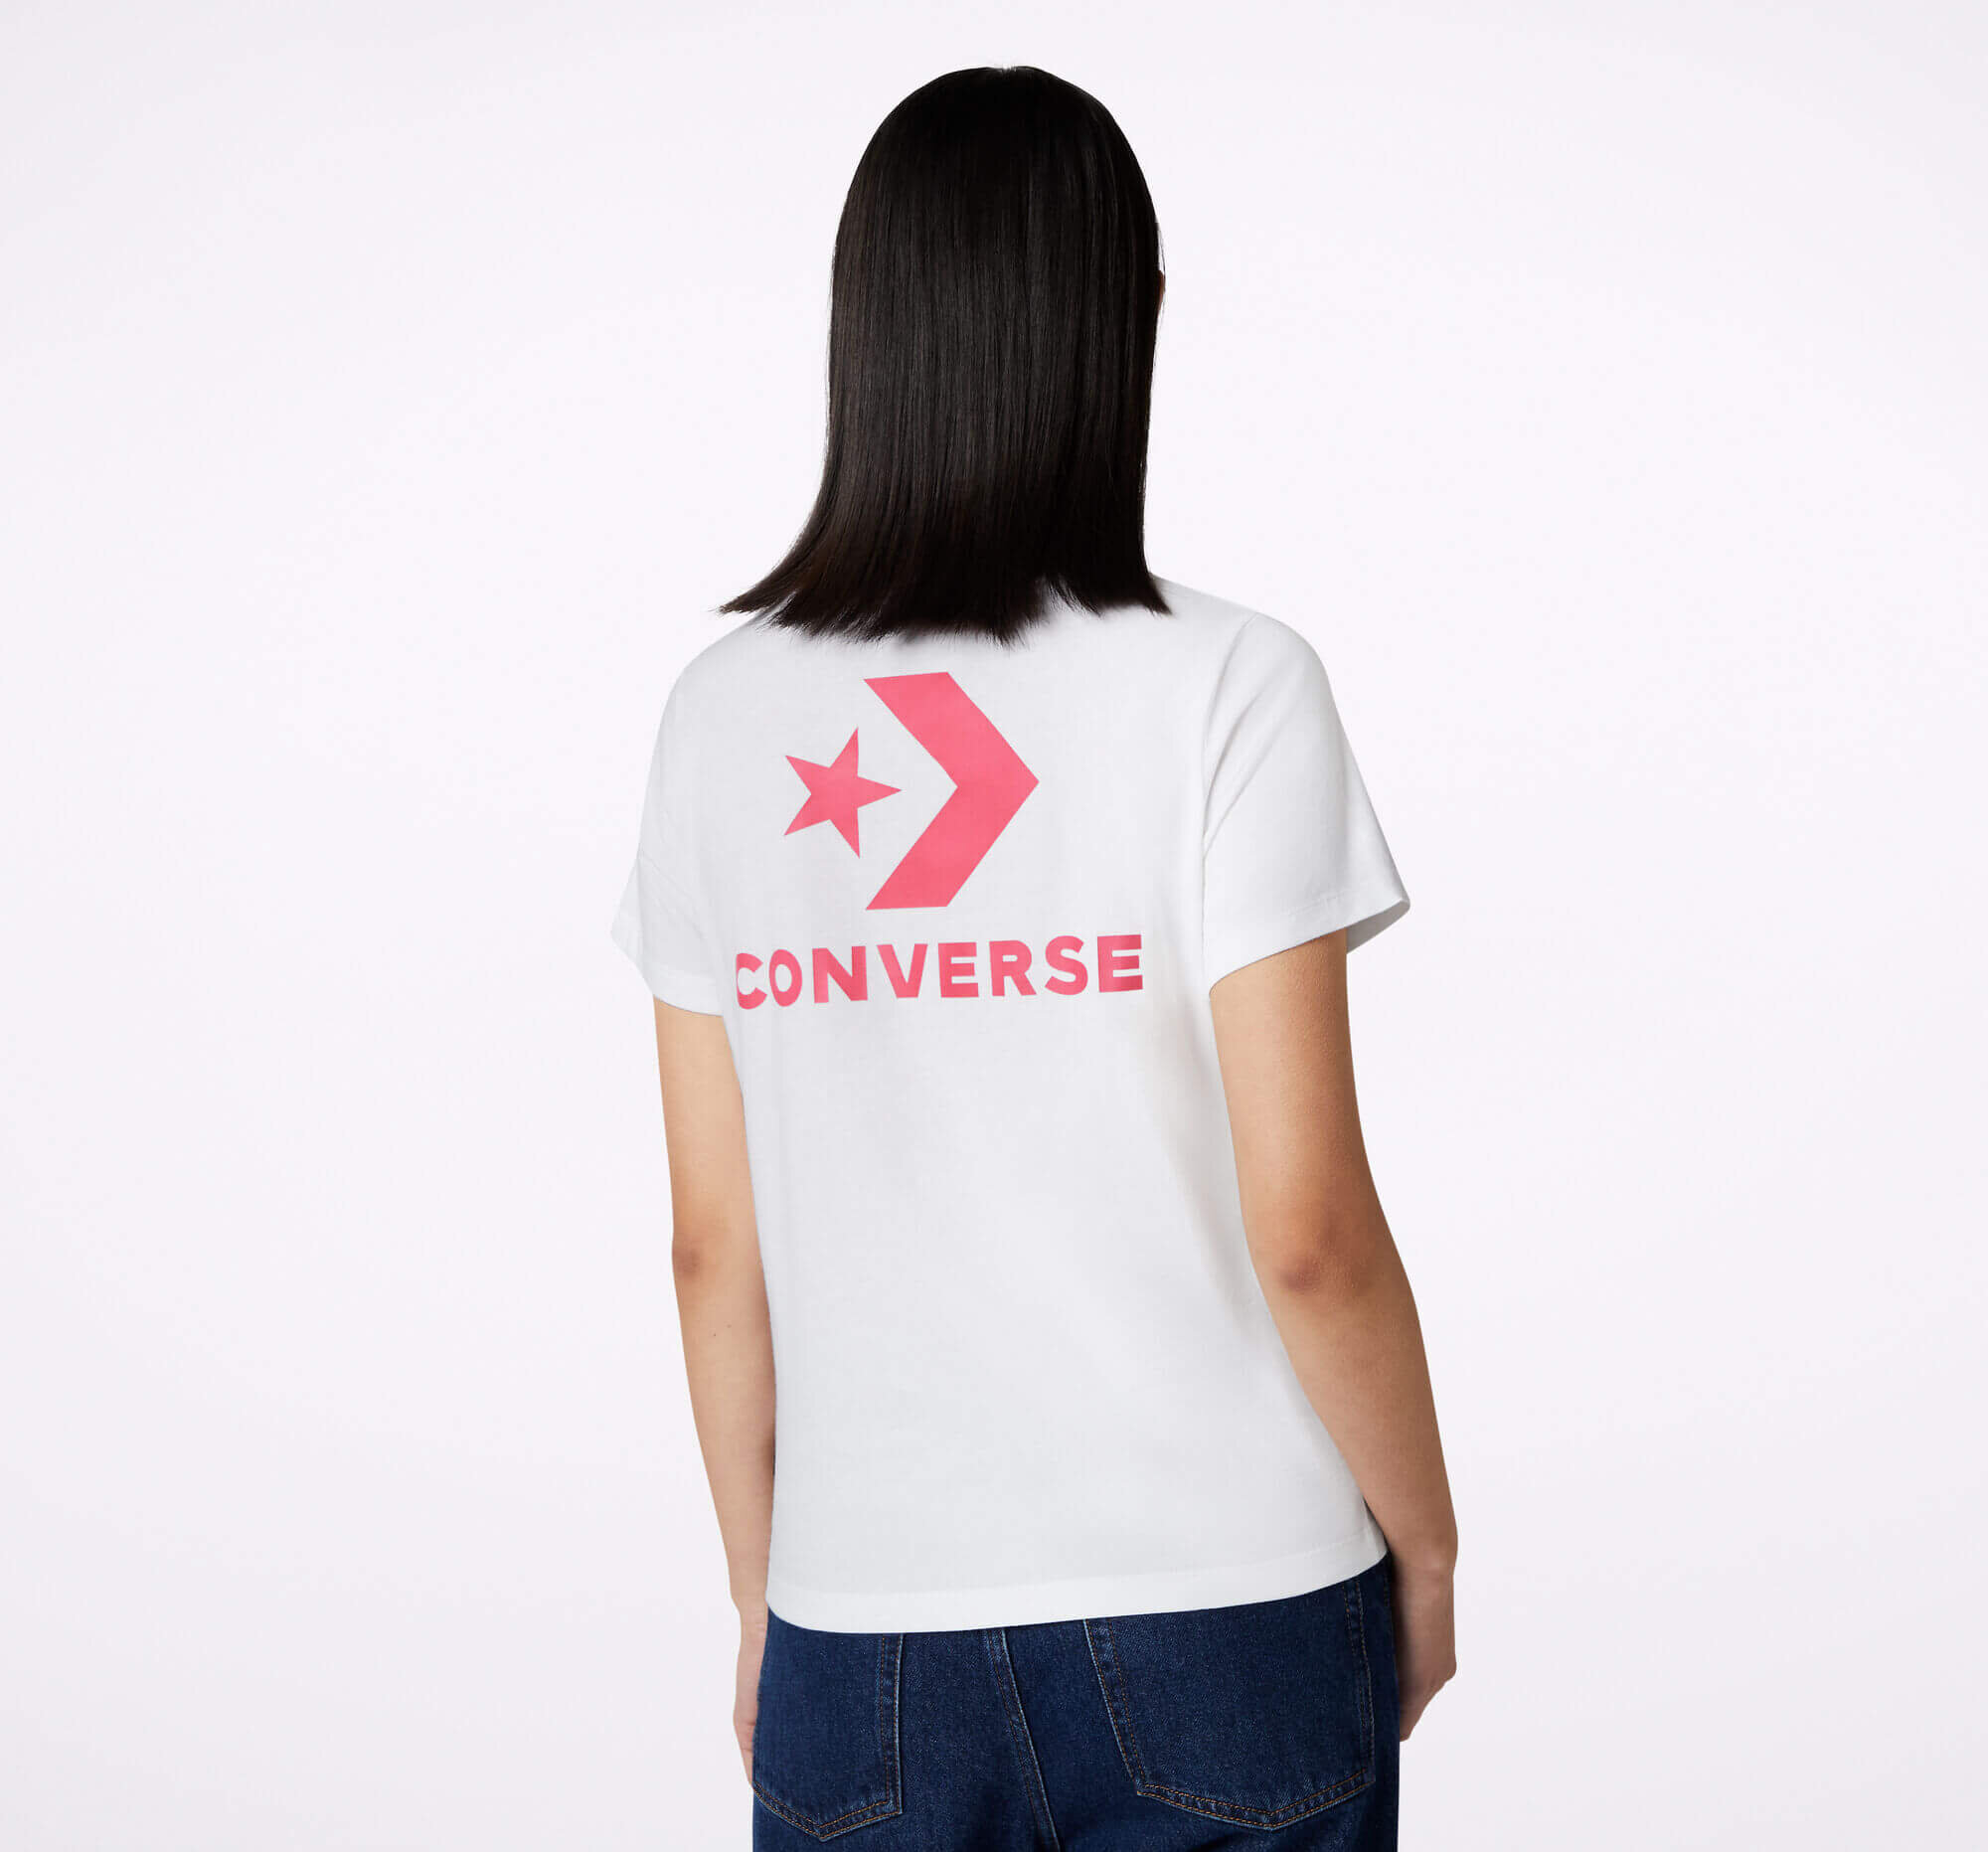 CNK-Converse-My-Story-Collection-Empowerment-tee-back.jpg